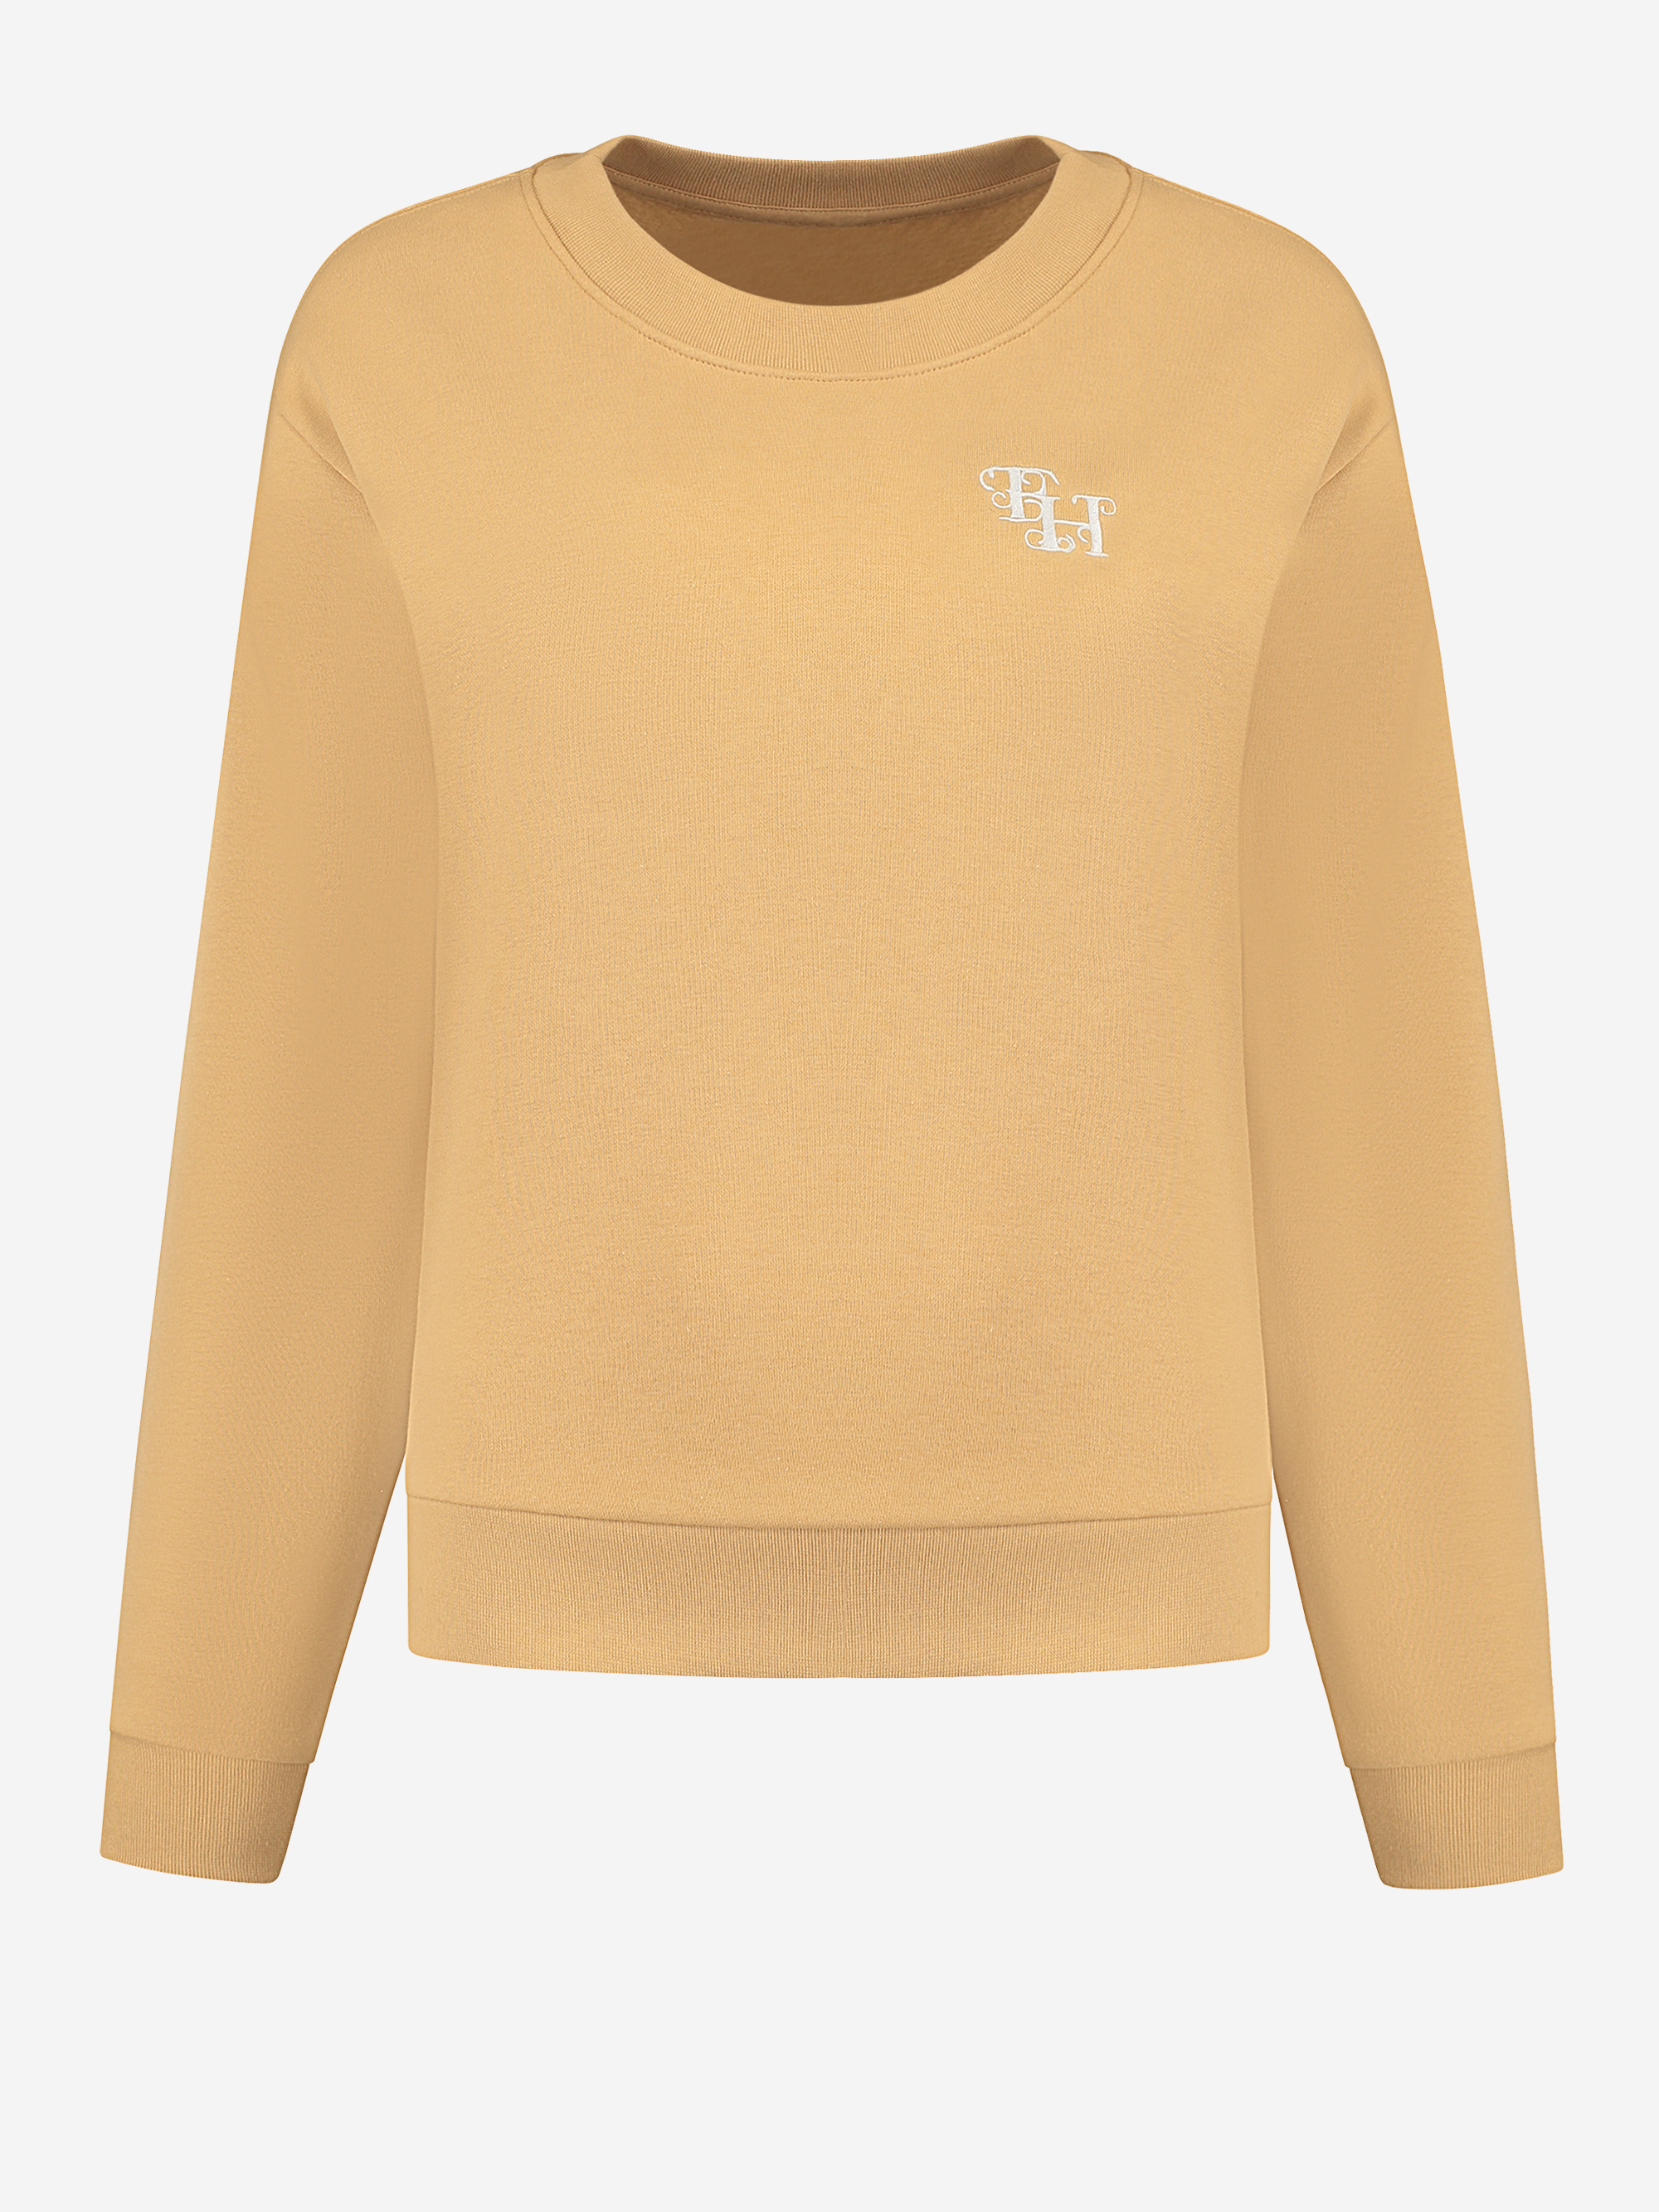 Sweater with FIFTH HOUSE logo